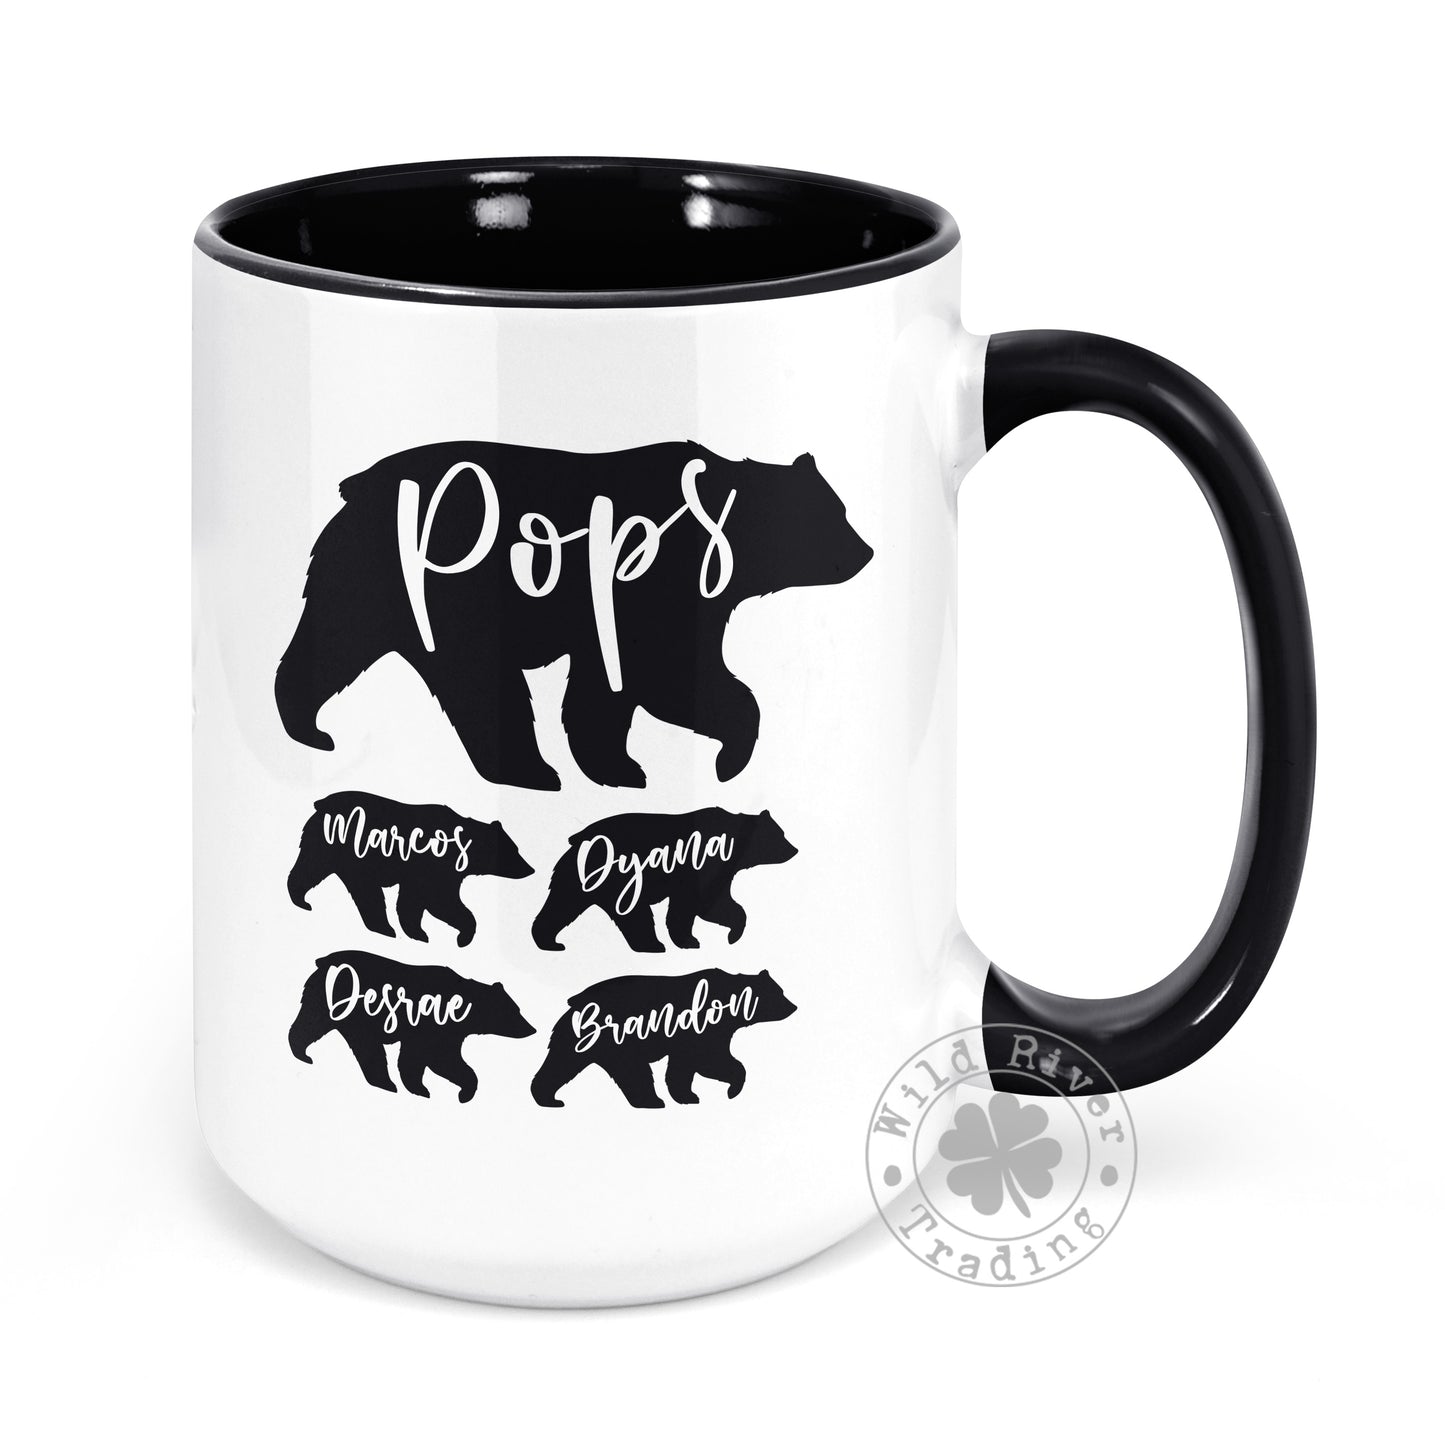 Papa Bear and Cubs Children's Names in Bear Silhouettes Personalized Mug